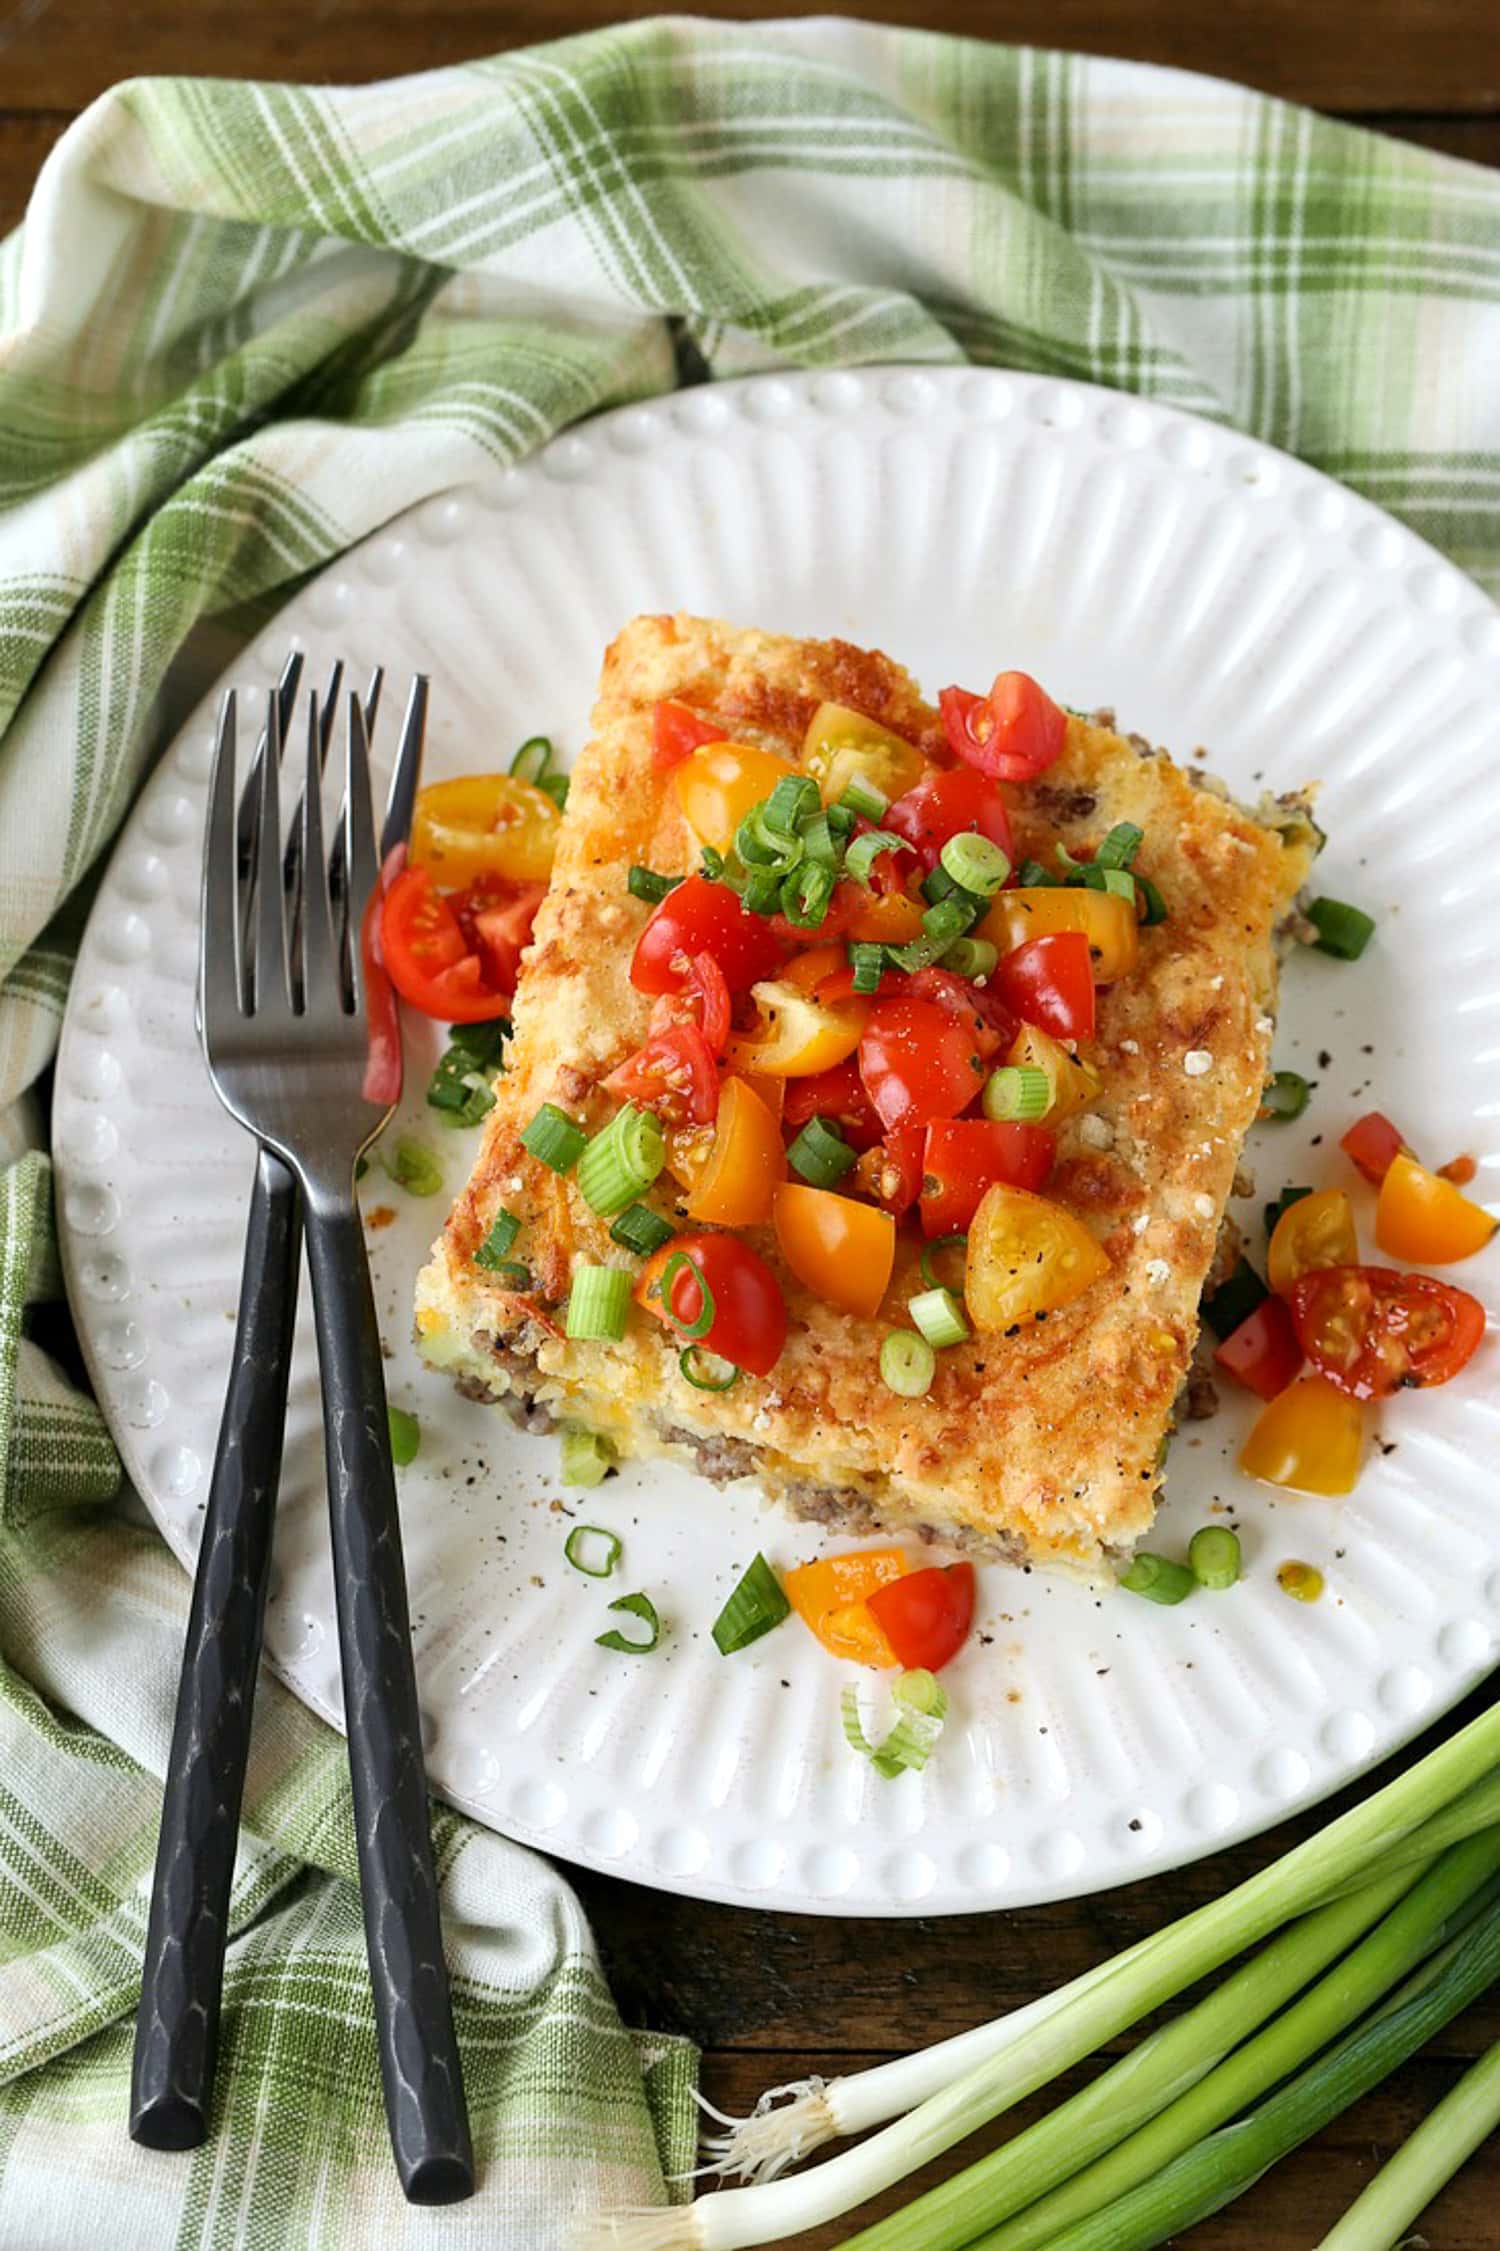 slice of breakfast casserole on plate with tomatoes